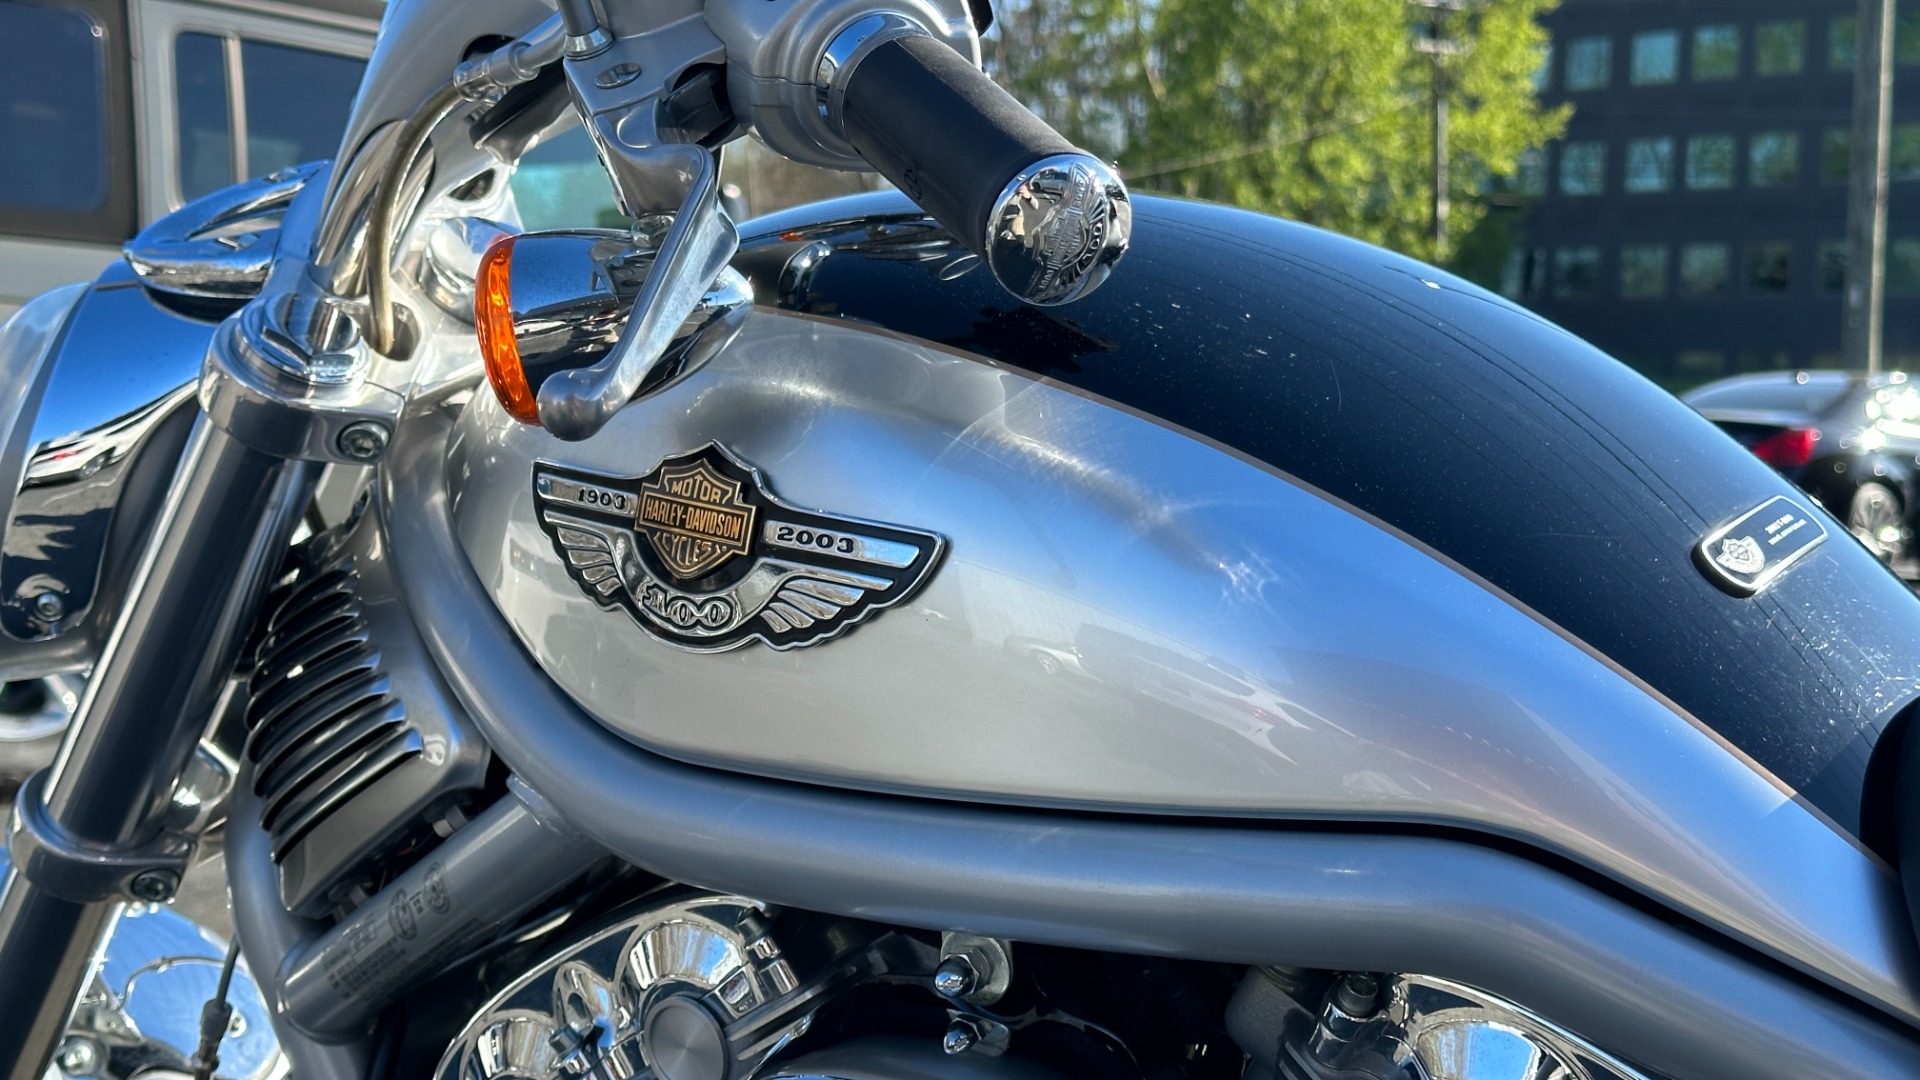 Used 2003 Harley Davidson V Rod ANNIVERSARY EDITION / 1130CC ENGINE / BREMBO BRAKES / VORTEX AIR SCOOPS for sale $9,995 at Formula Imports in Charlotte NC 28227 41